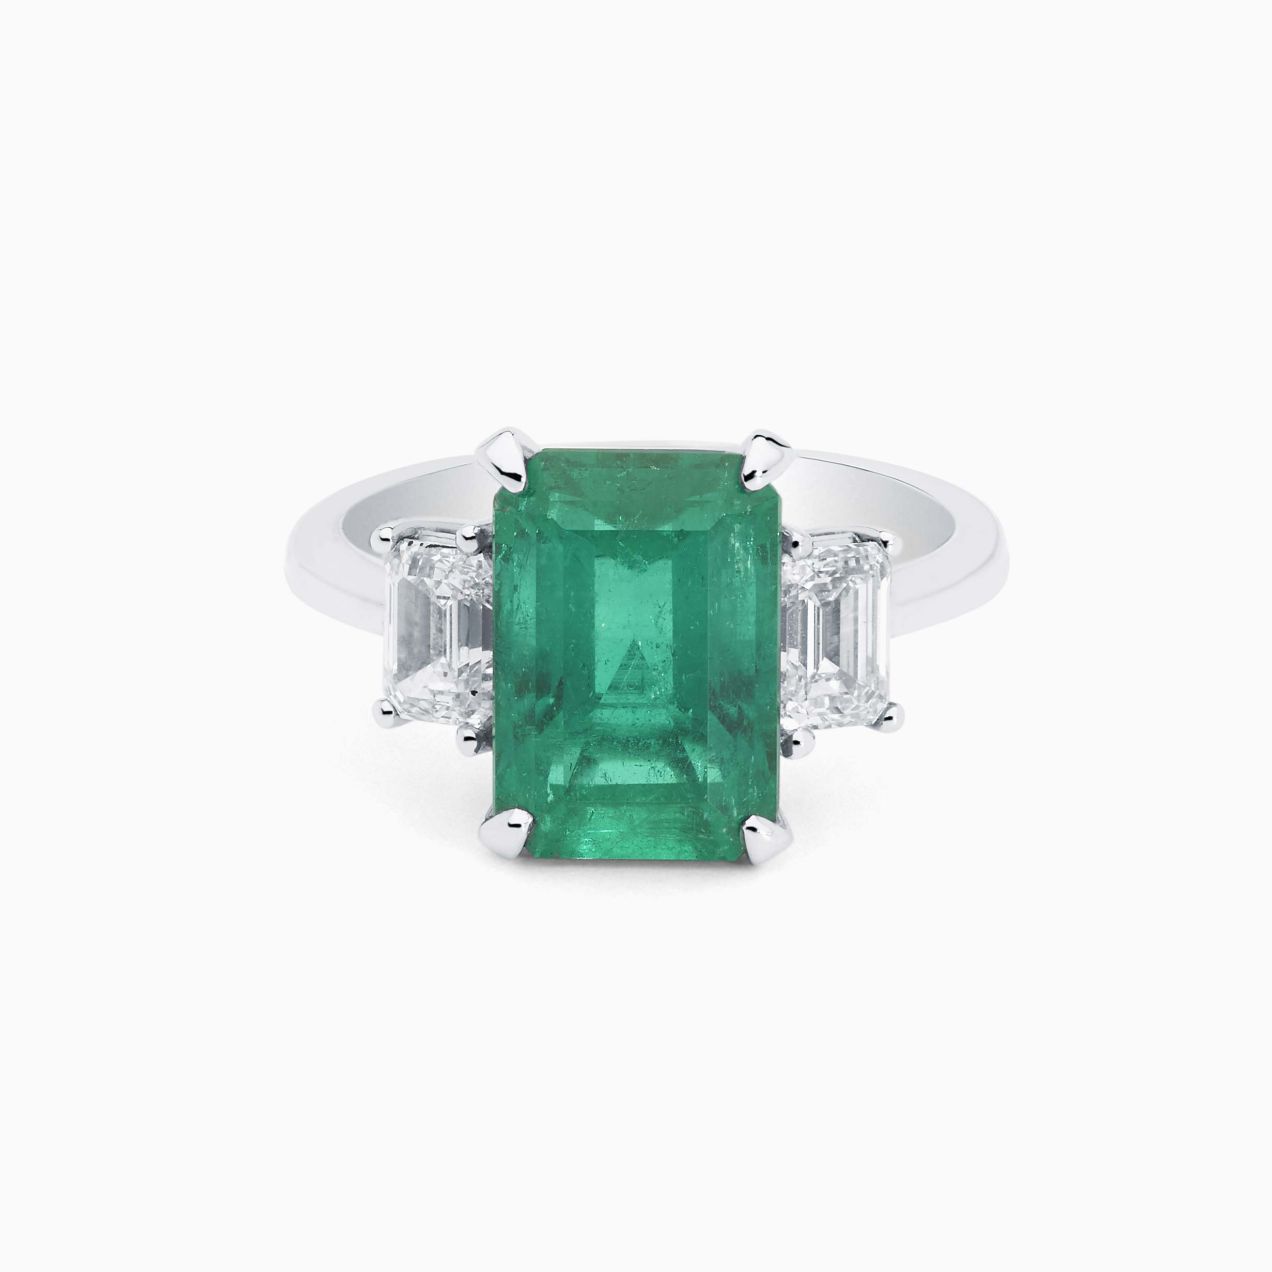 White gold with emerald diamonds in the center and in the side solitaire ring